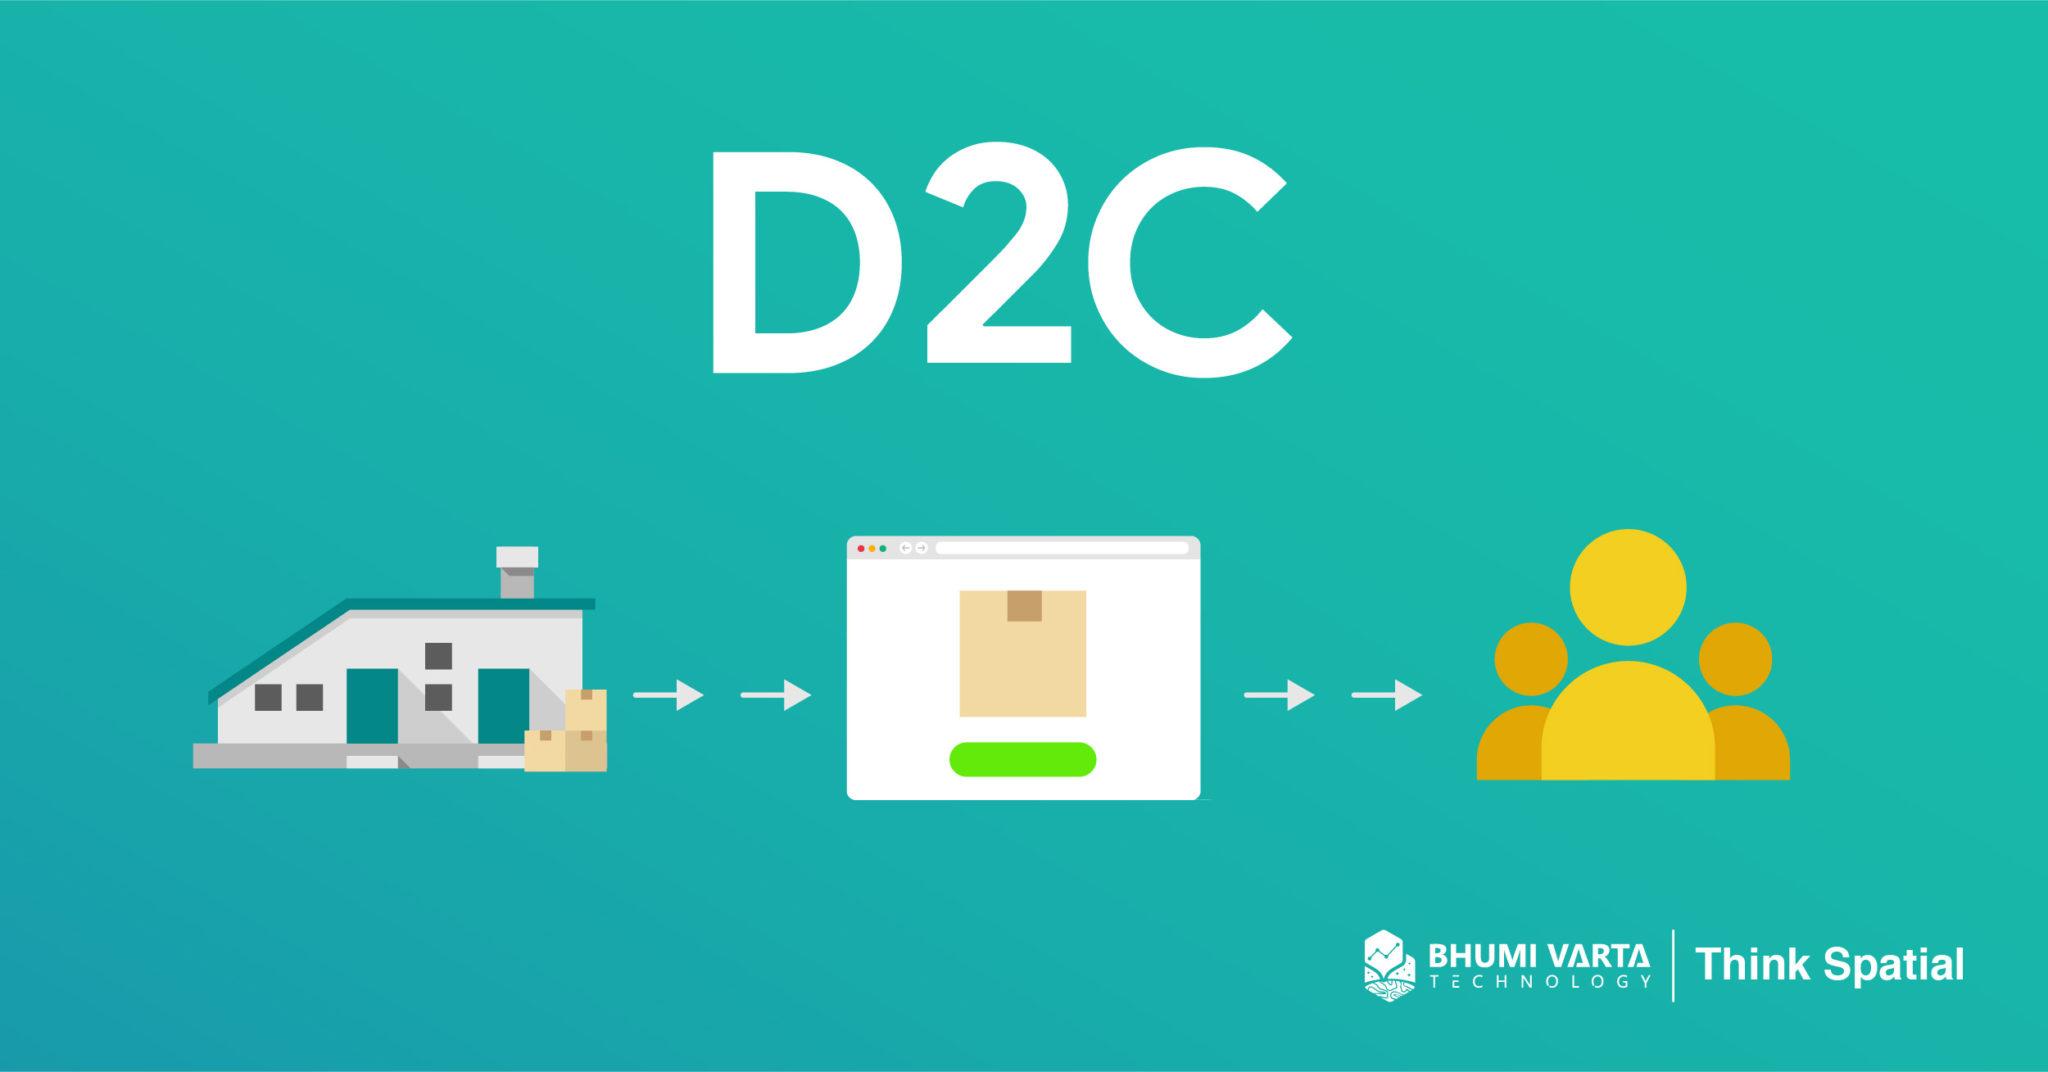 5 Reasons Why You Should Implement D2C Business Model